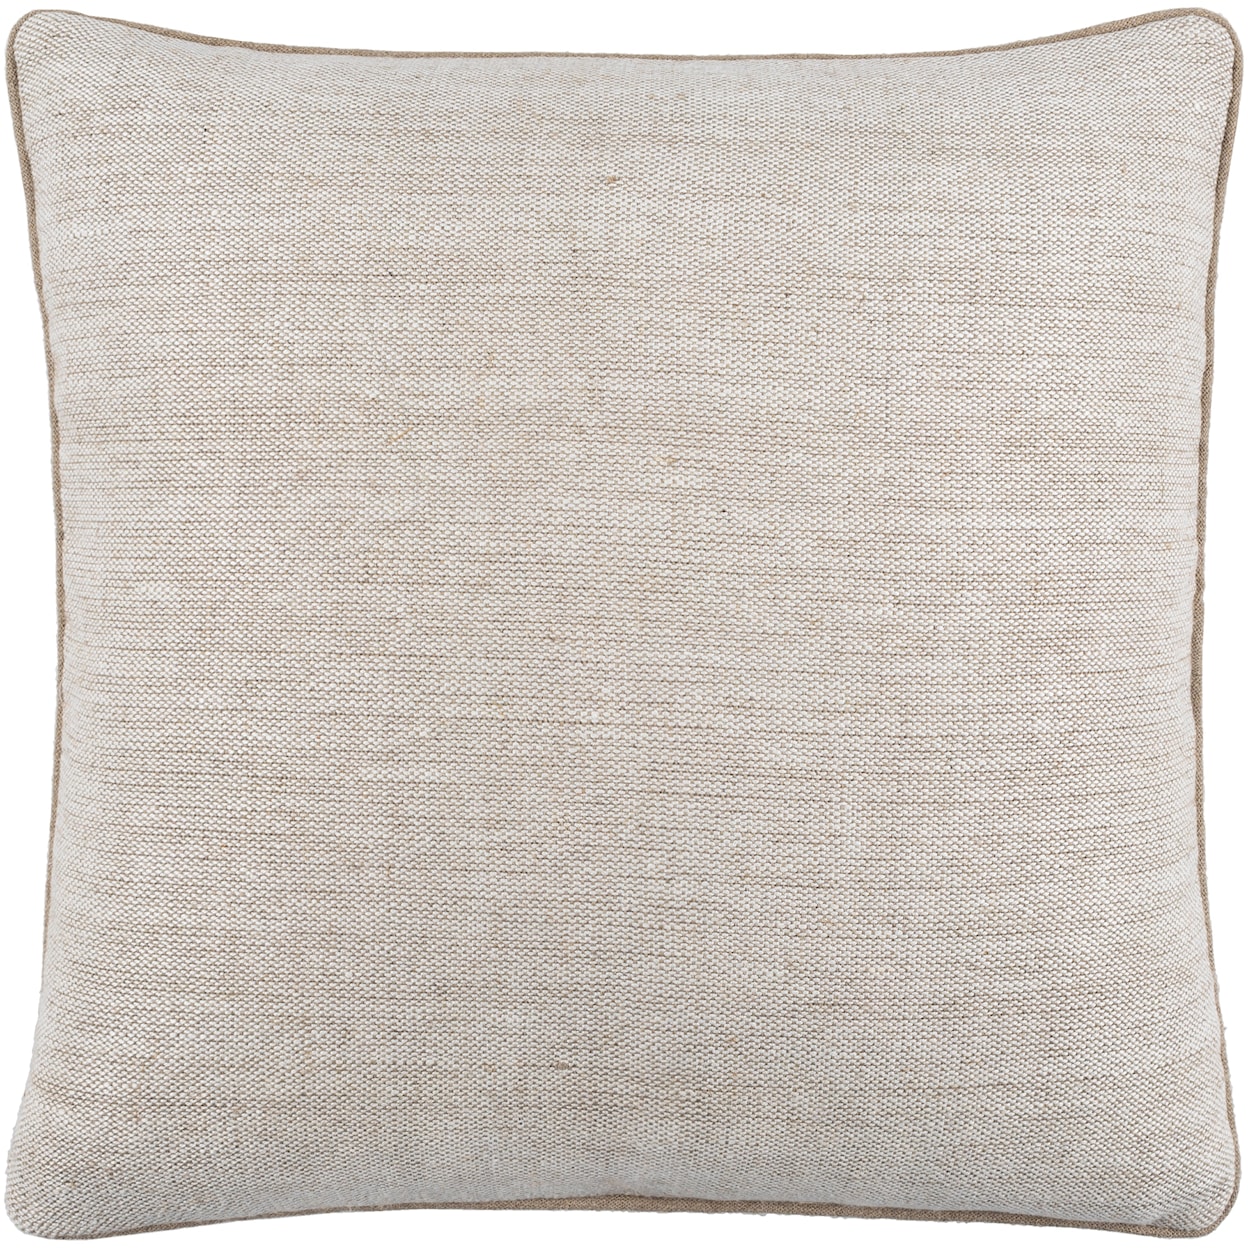 Surya Rugs Betty Pillow Cover